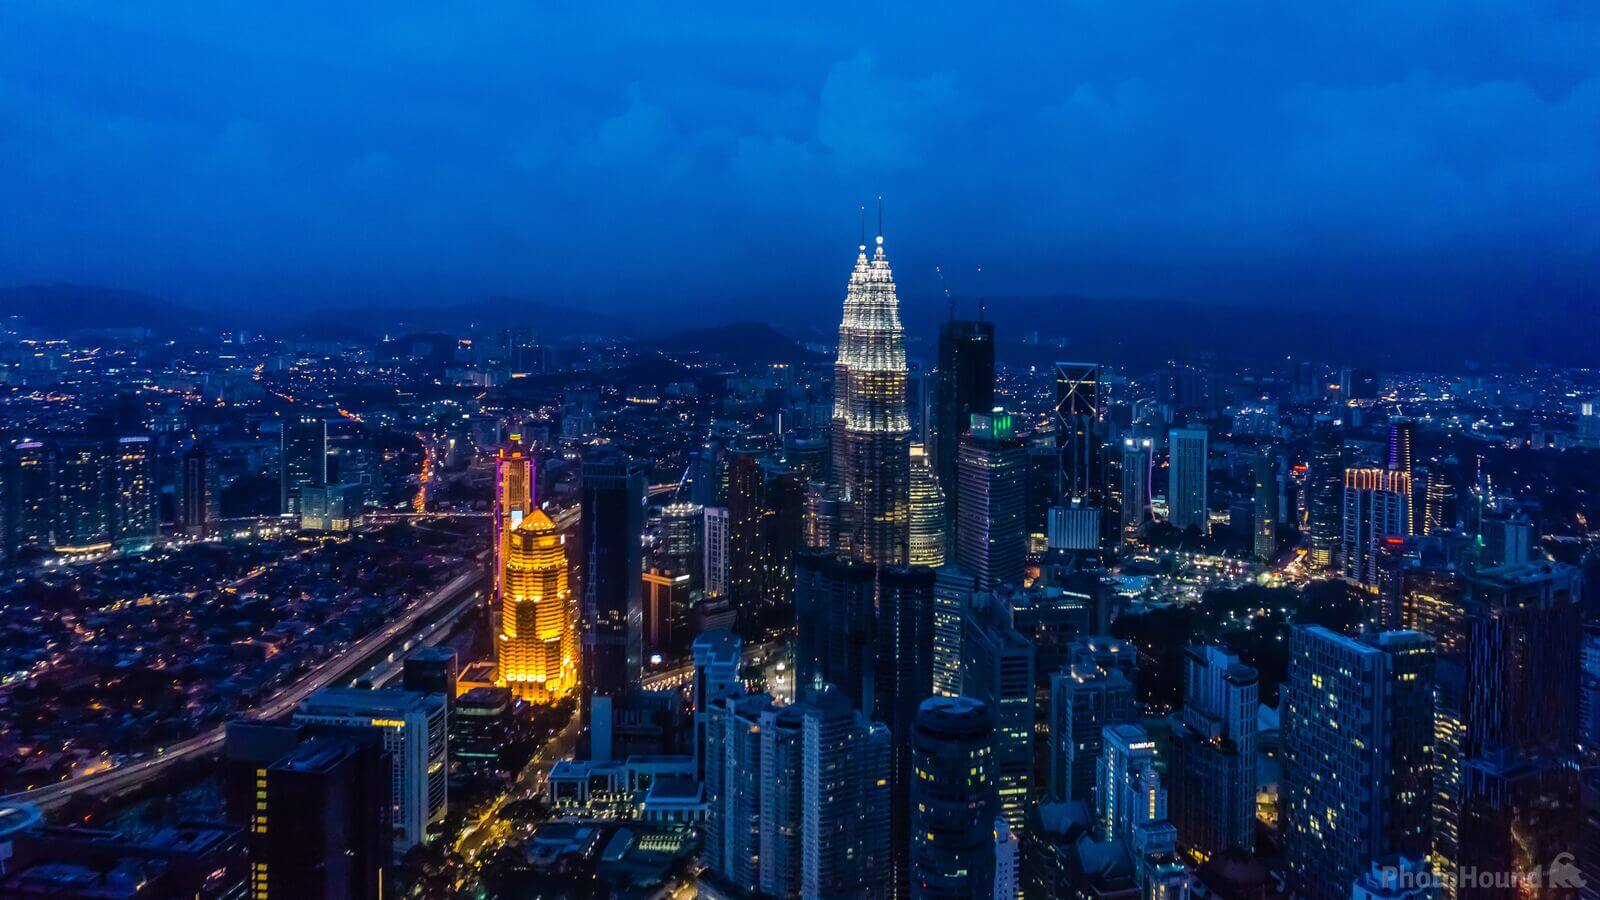 Image of KL Tower by Team PhotoHound